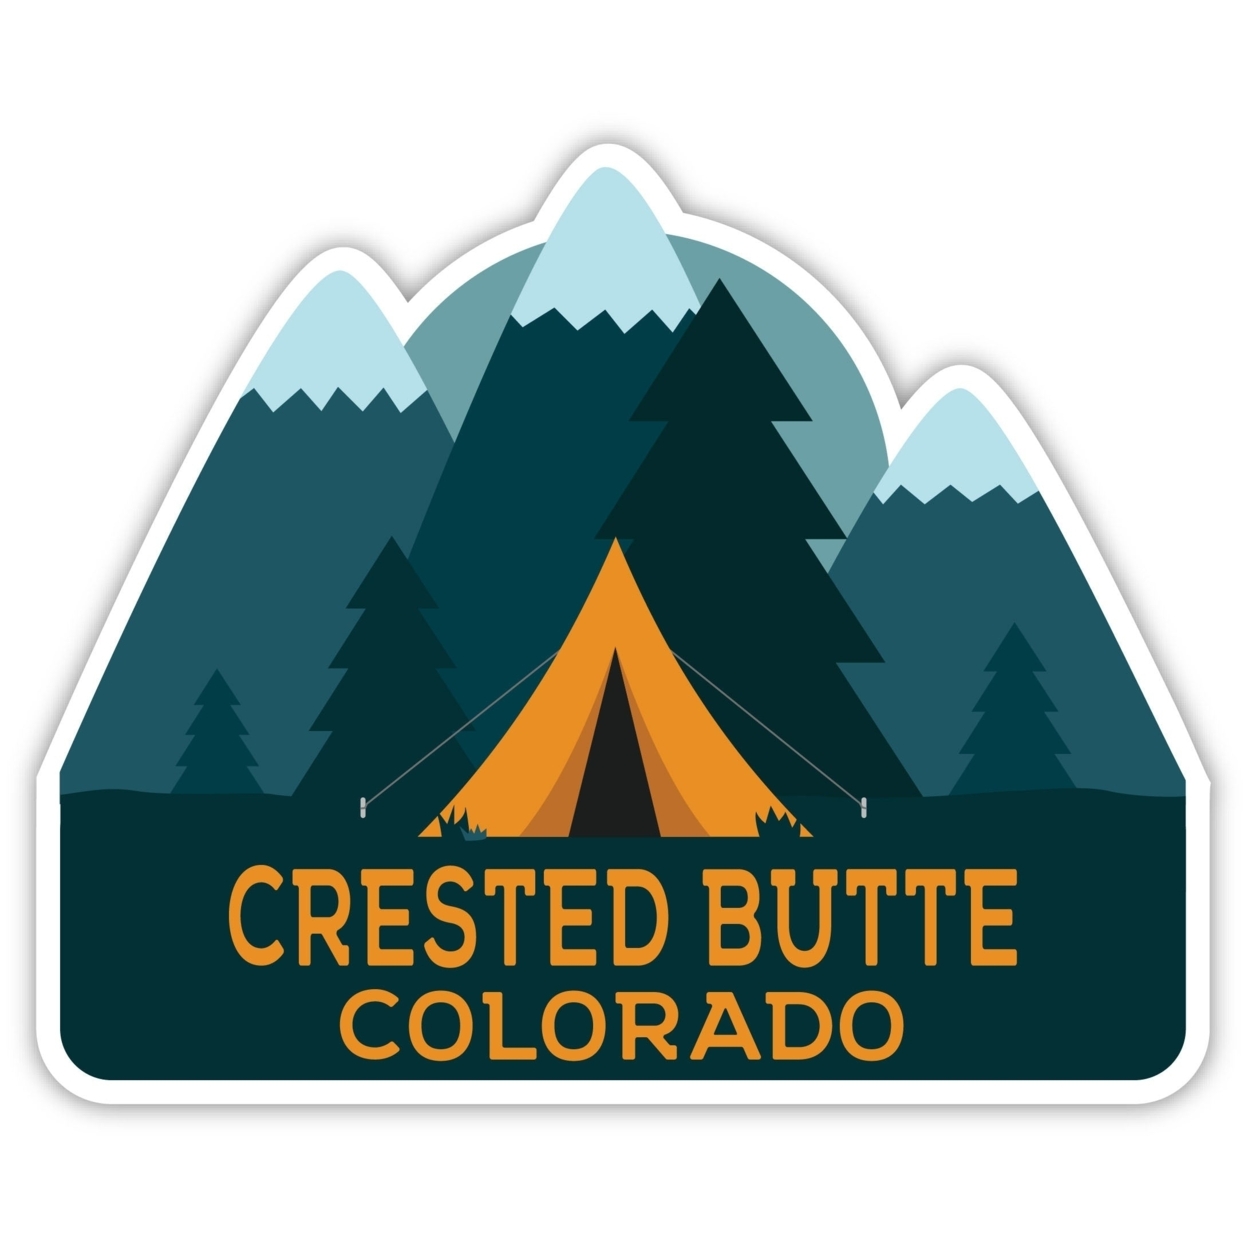 Crested Butte Colorado Souvenir Decorative Stickers (Choose Theme And Size) - 4-Pack, 12-Inch, Tent